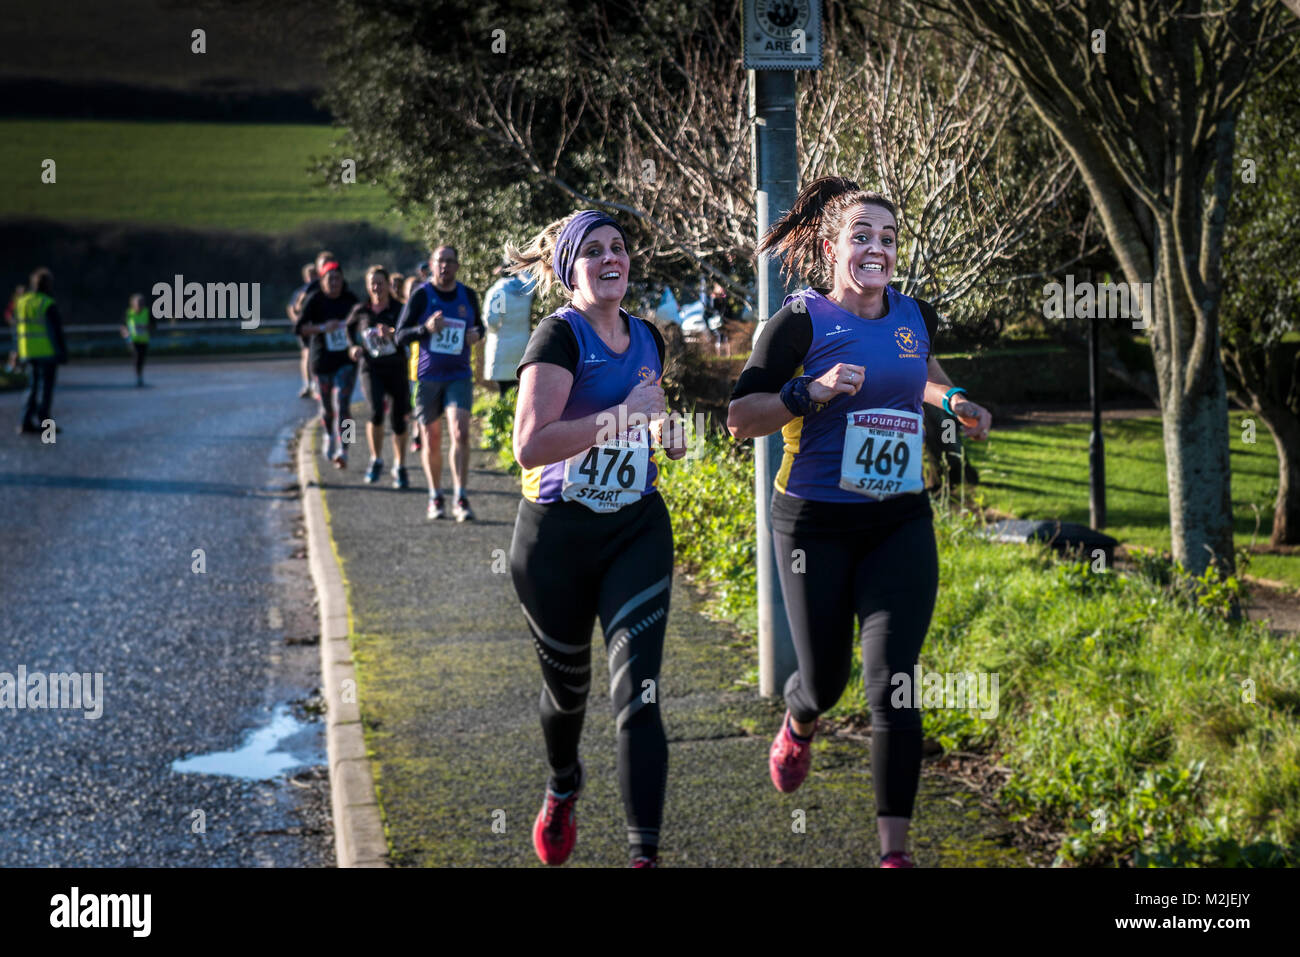 Runners competing in a road race in Newquay Cornwall. Stock Photo